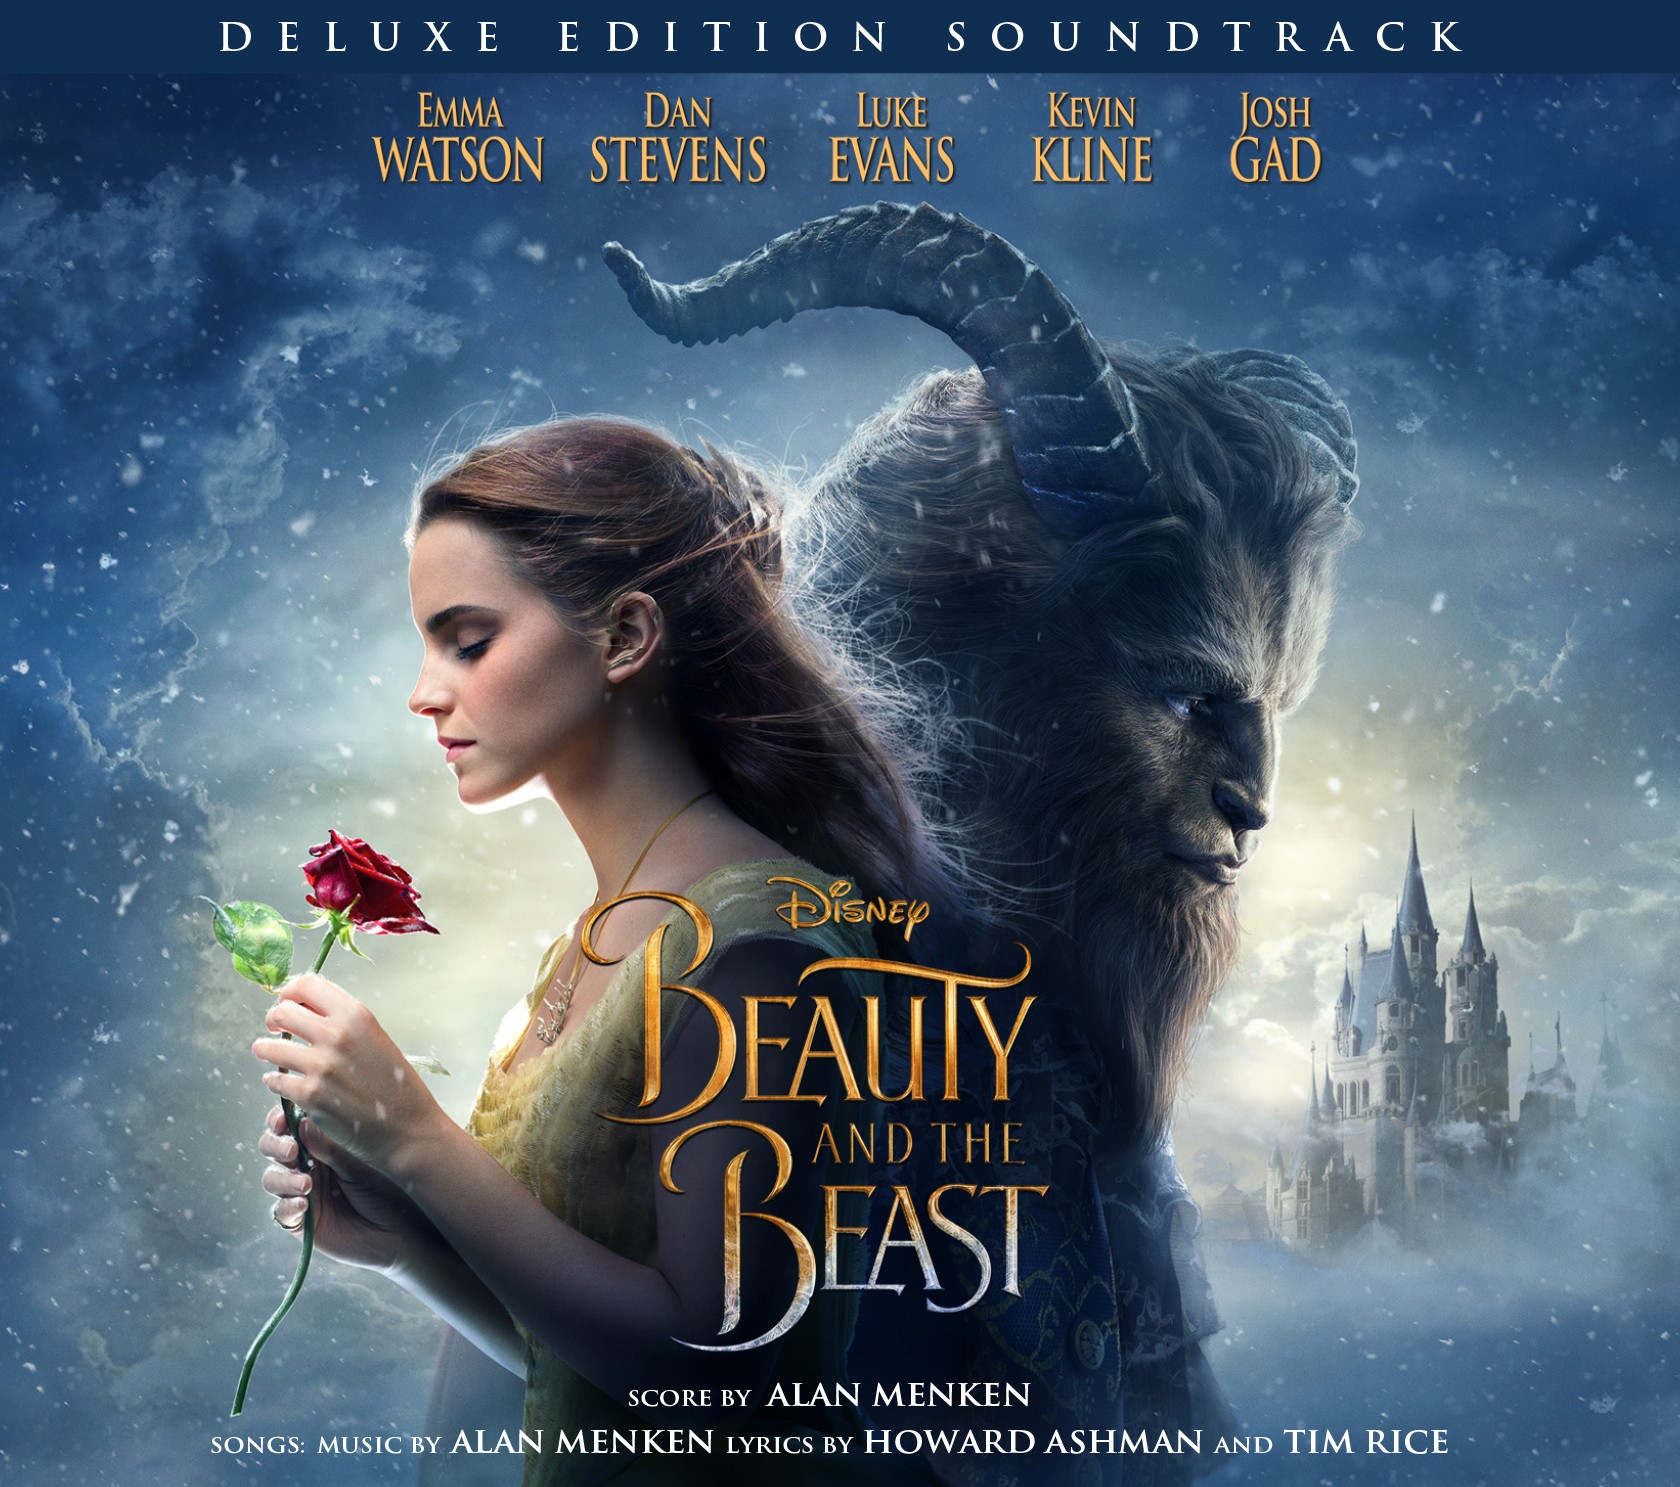 Celine Dion to Perform Original Song ‘How Does a Moment Last Forever’ for Disney’s ‘Beauty and the Beast’